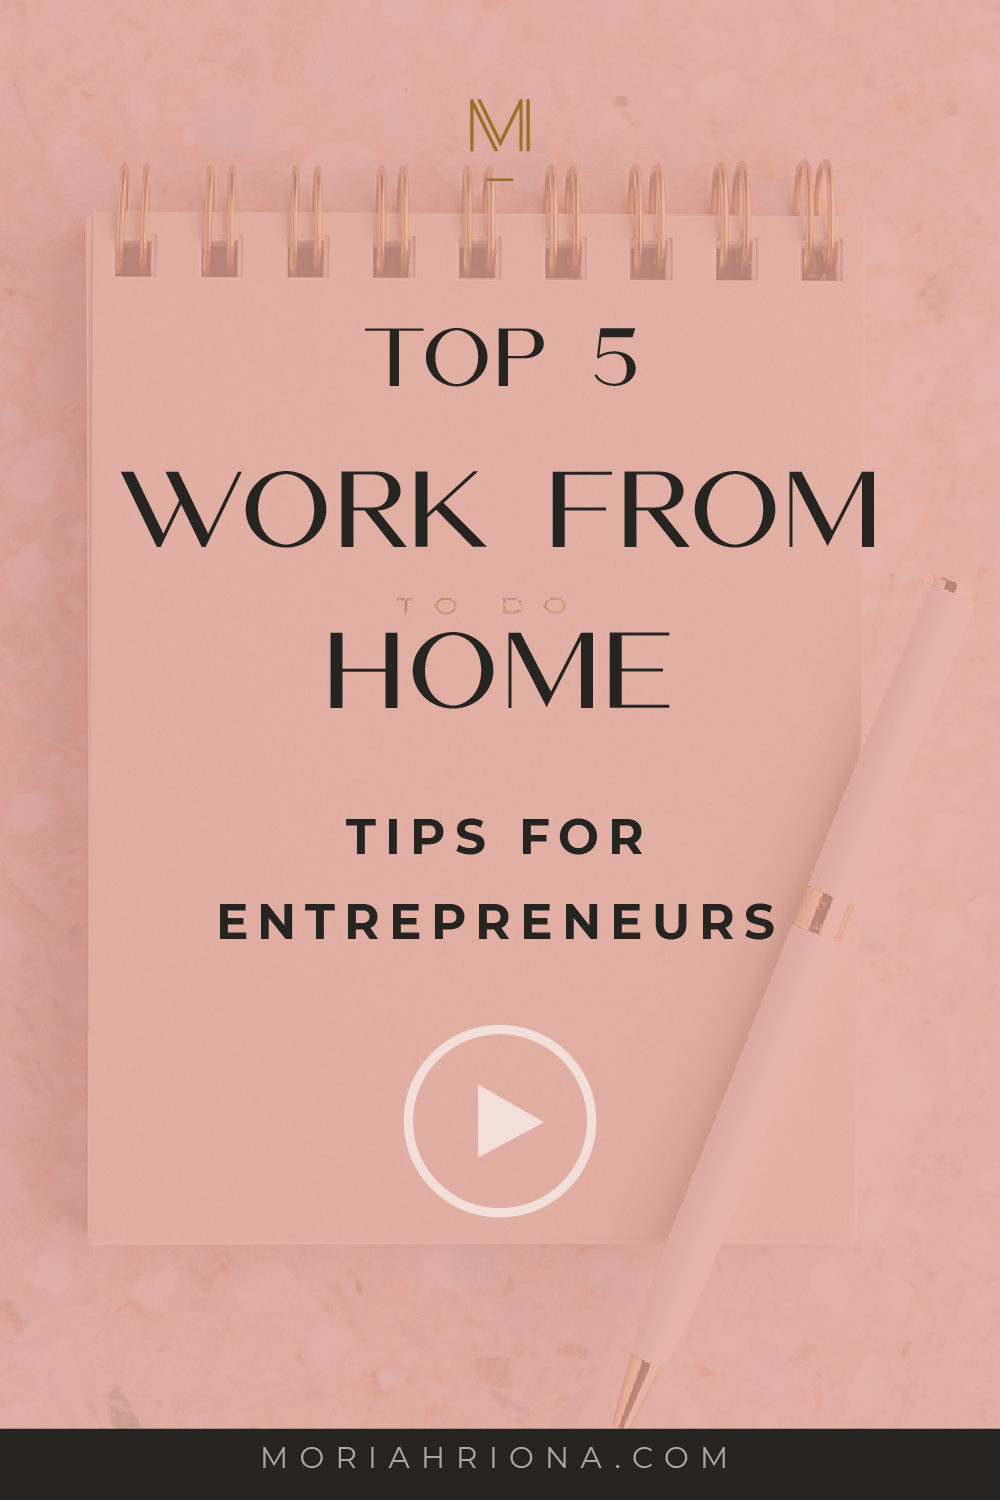 Wondering how to develop your work from home productivity as an entrepreneur? This video is for you! I’m sharing my best work from home productivity tips for entrepreneurs—including my working from home routine, productivity hacks, and my work from home productivity setup. #productivity #organization #DIY #business